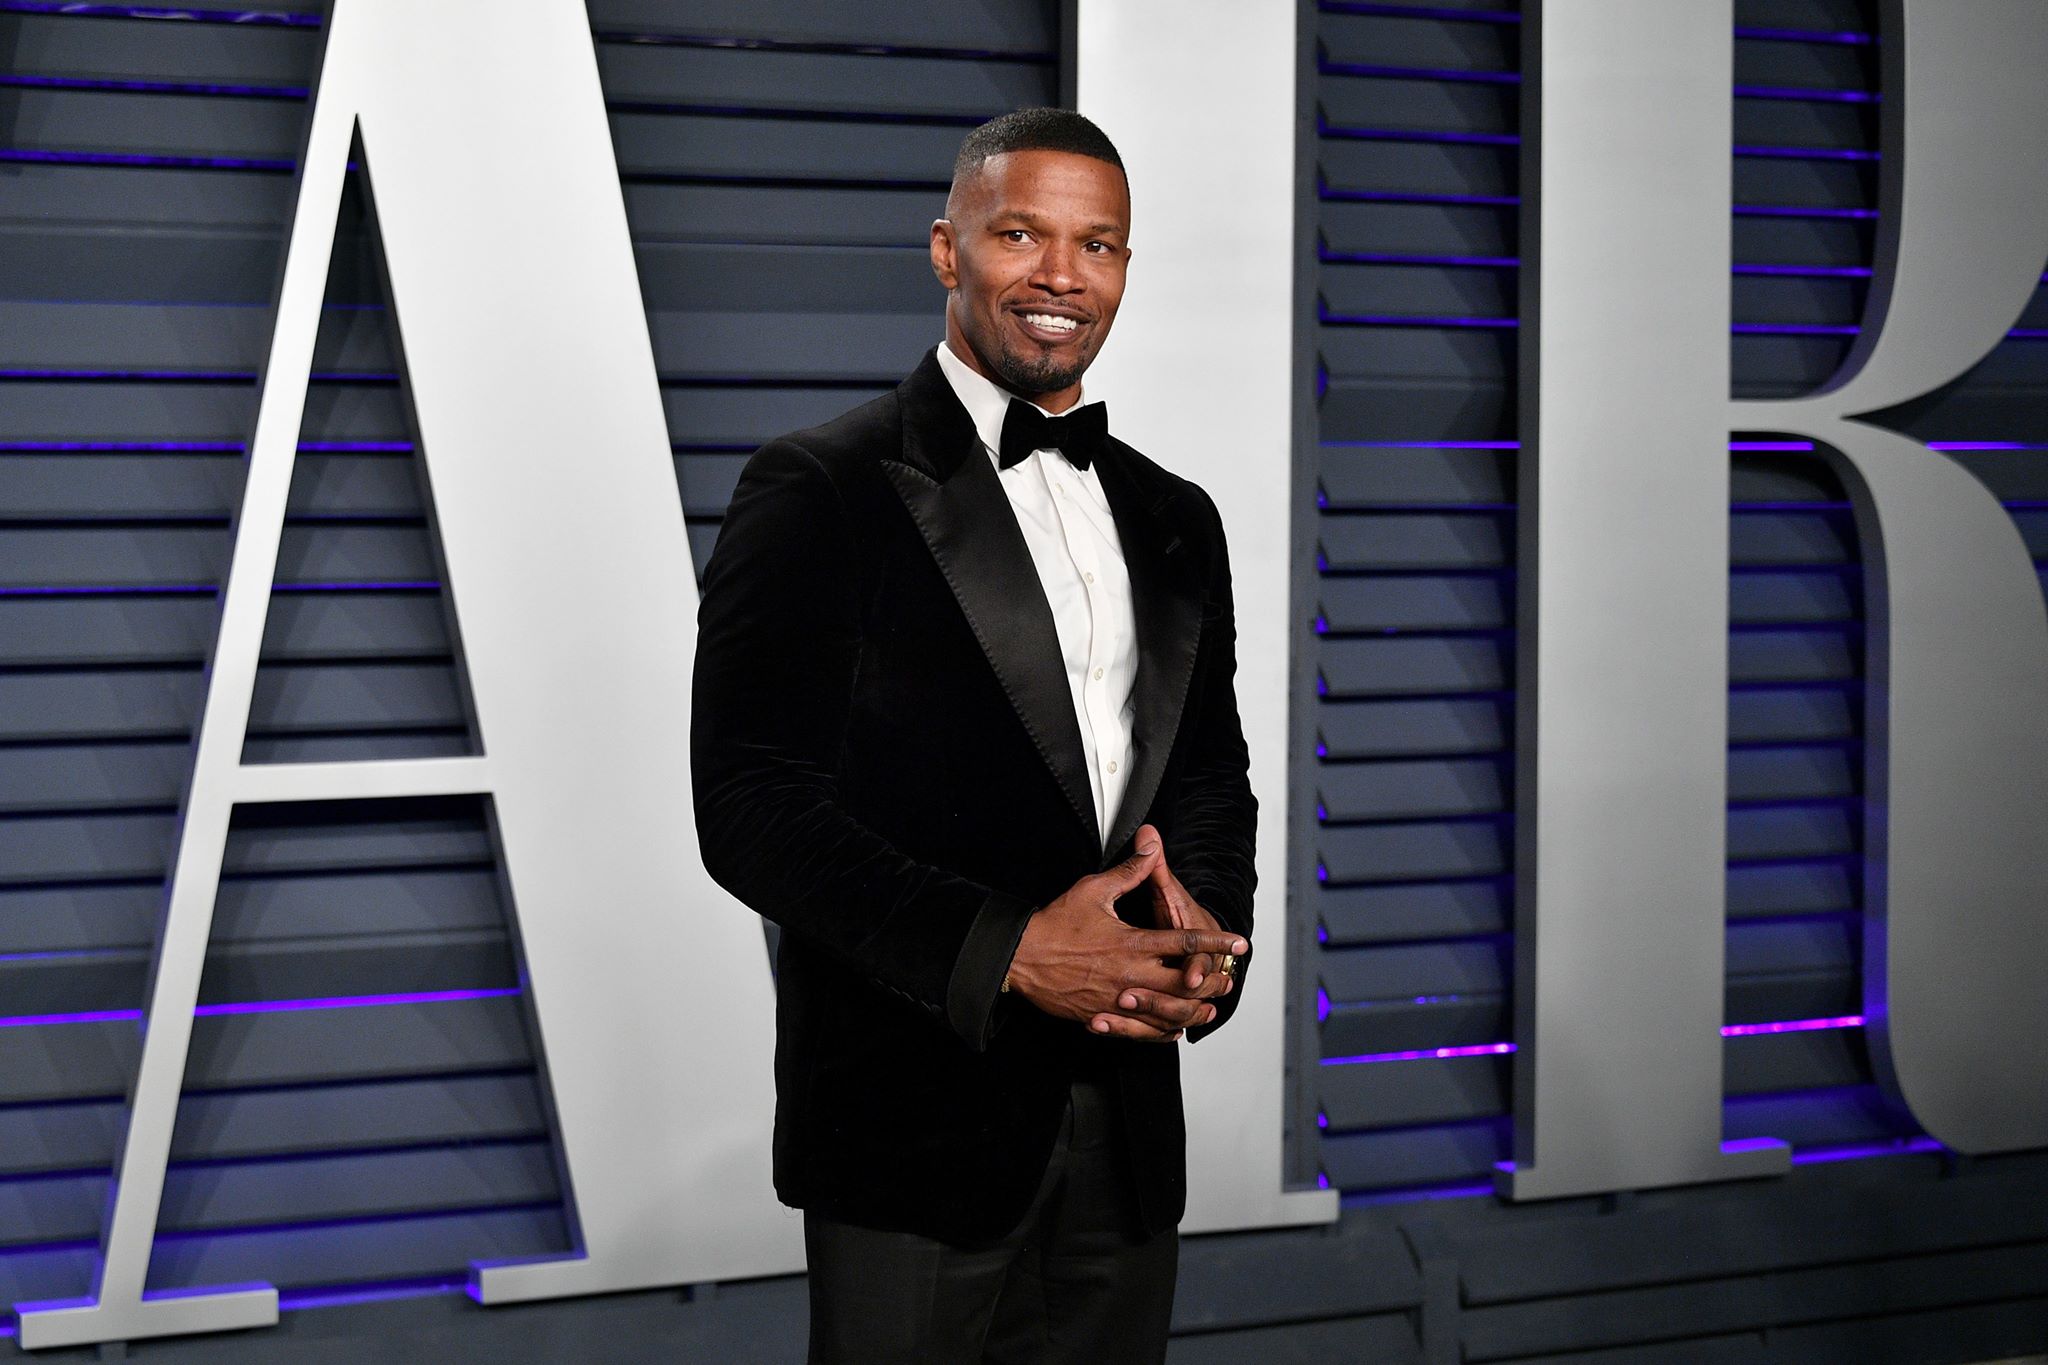 Jamie Foxx attends the 2019 Vanity Fair Oscar party hosted by Radhika Jones at Wallis Annenberg Center for the Performing Arts on February 24, 2019 in Beverly Hills, California. I Image: Getty Images.